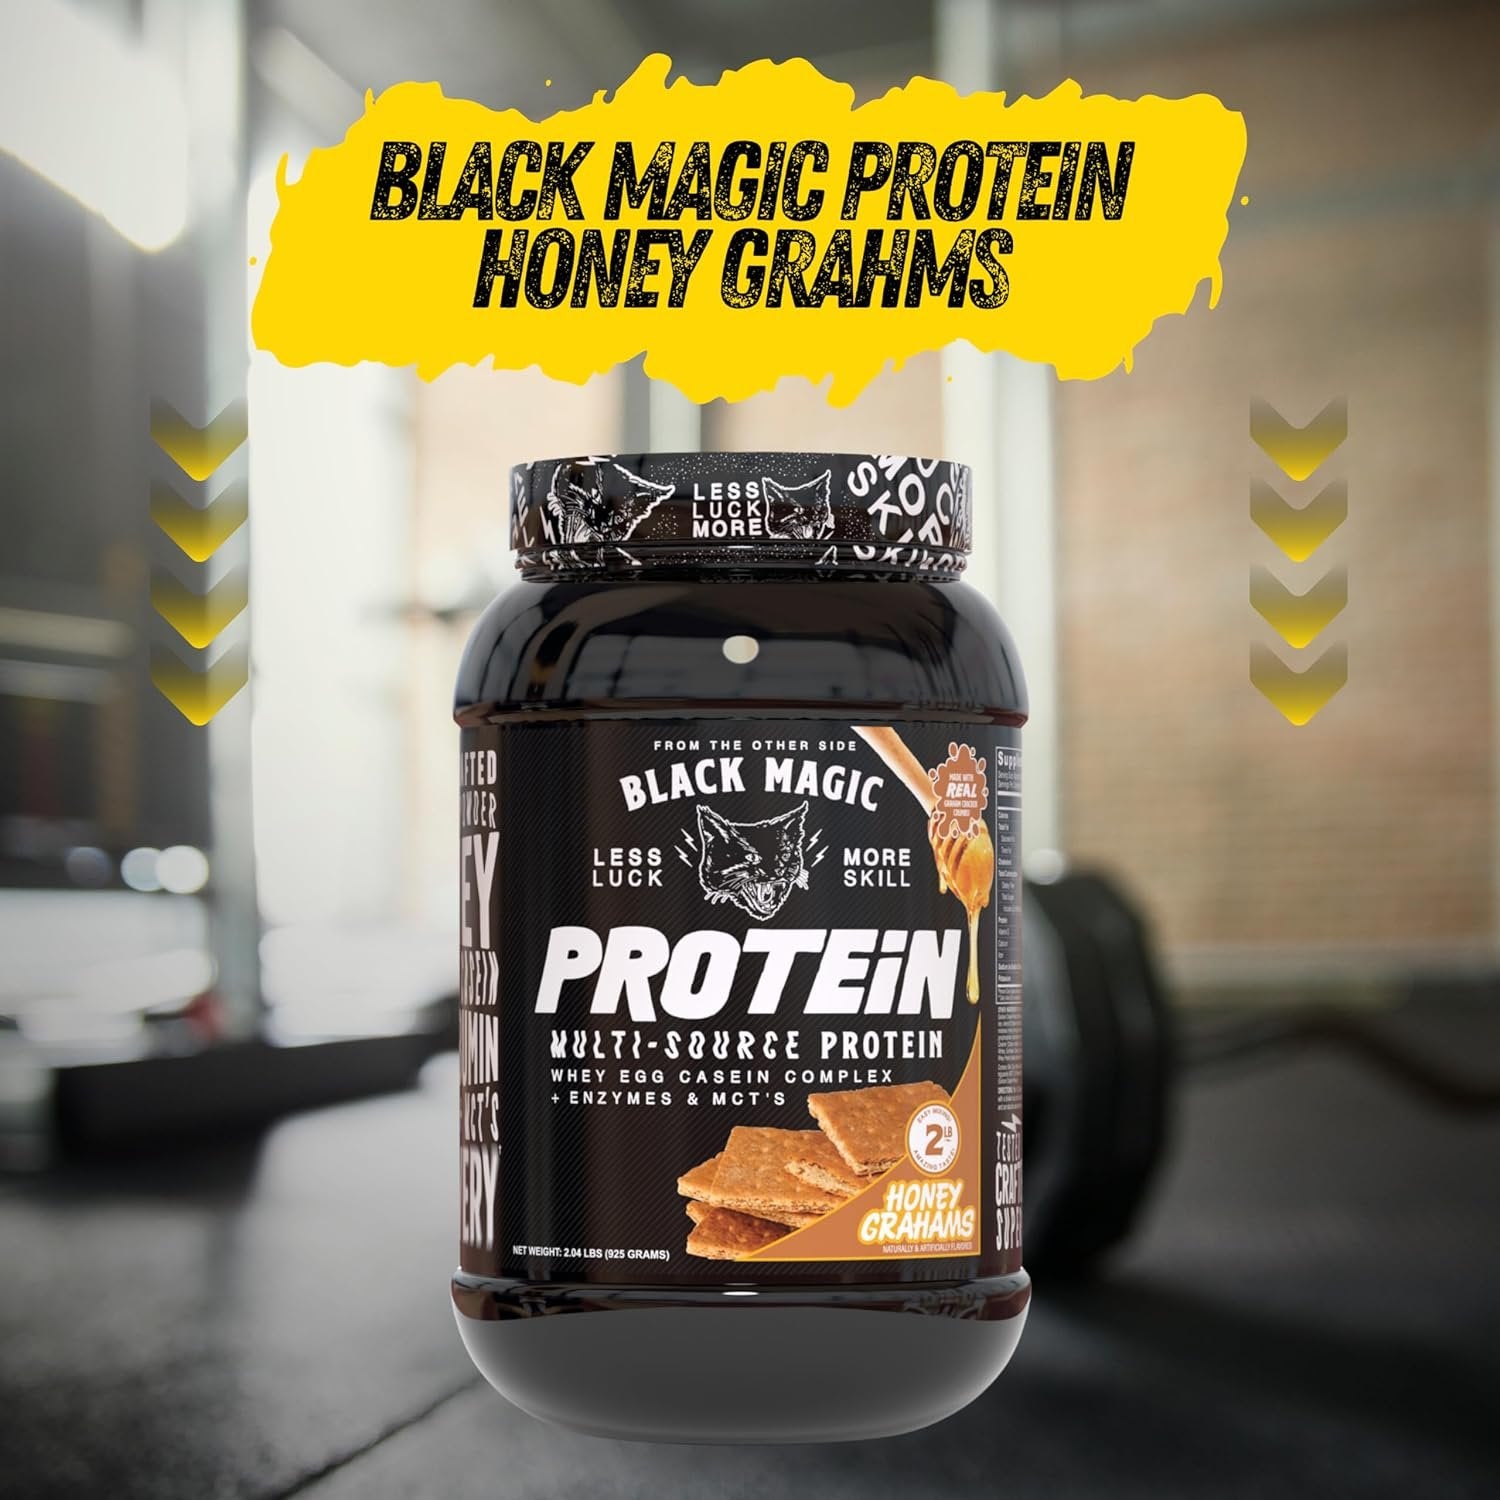 Black Magic Multi-Source Protein - Whey, Egg, and Casein Complex with Enzymes & MCT Powder - Pre Workout and Post Workout - Honey Grahms Protein Powder - 24g Protein - 2 LB with Bonus Key Chain